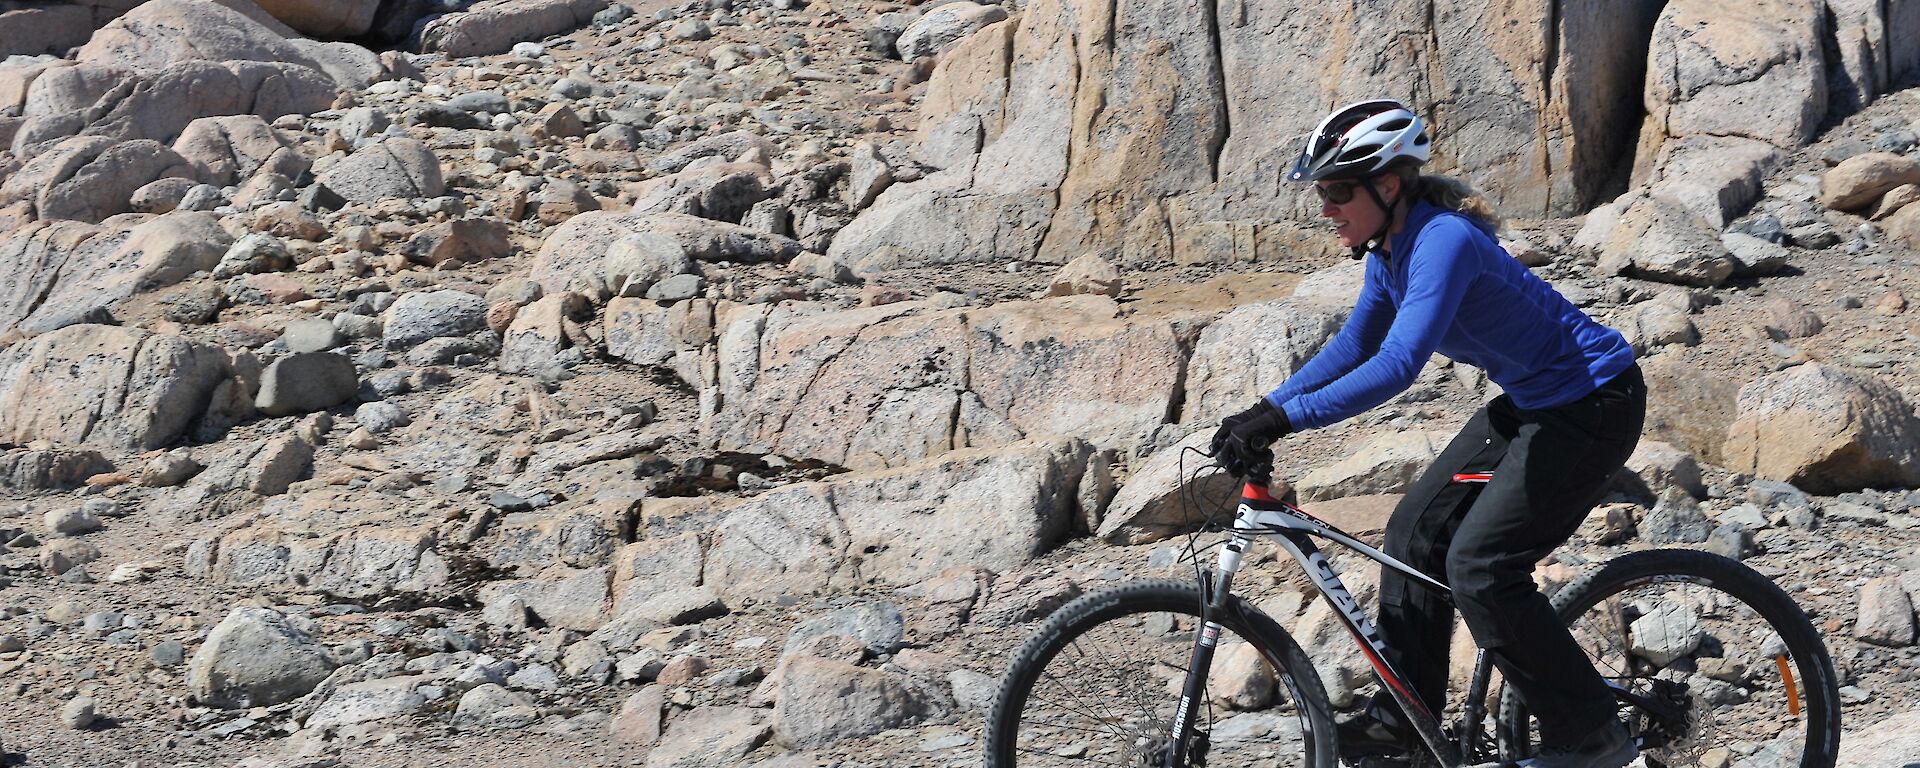 A female expeditioner riding a push bike in rocky terrain